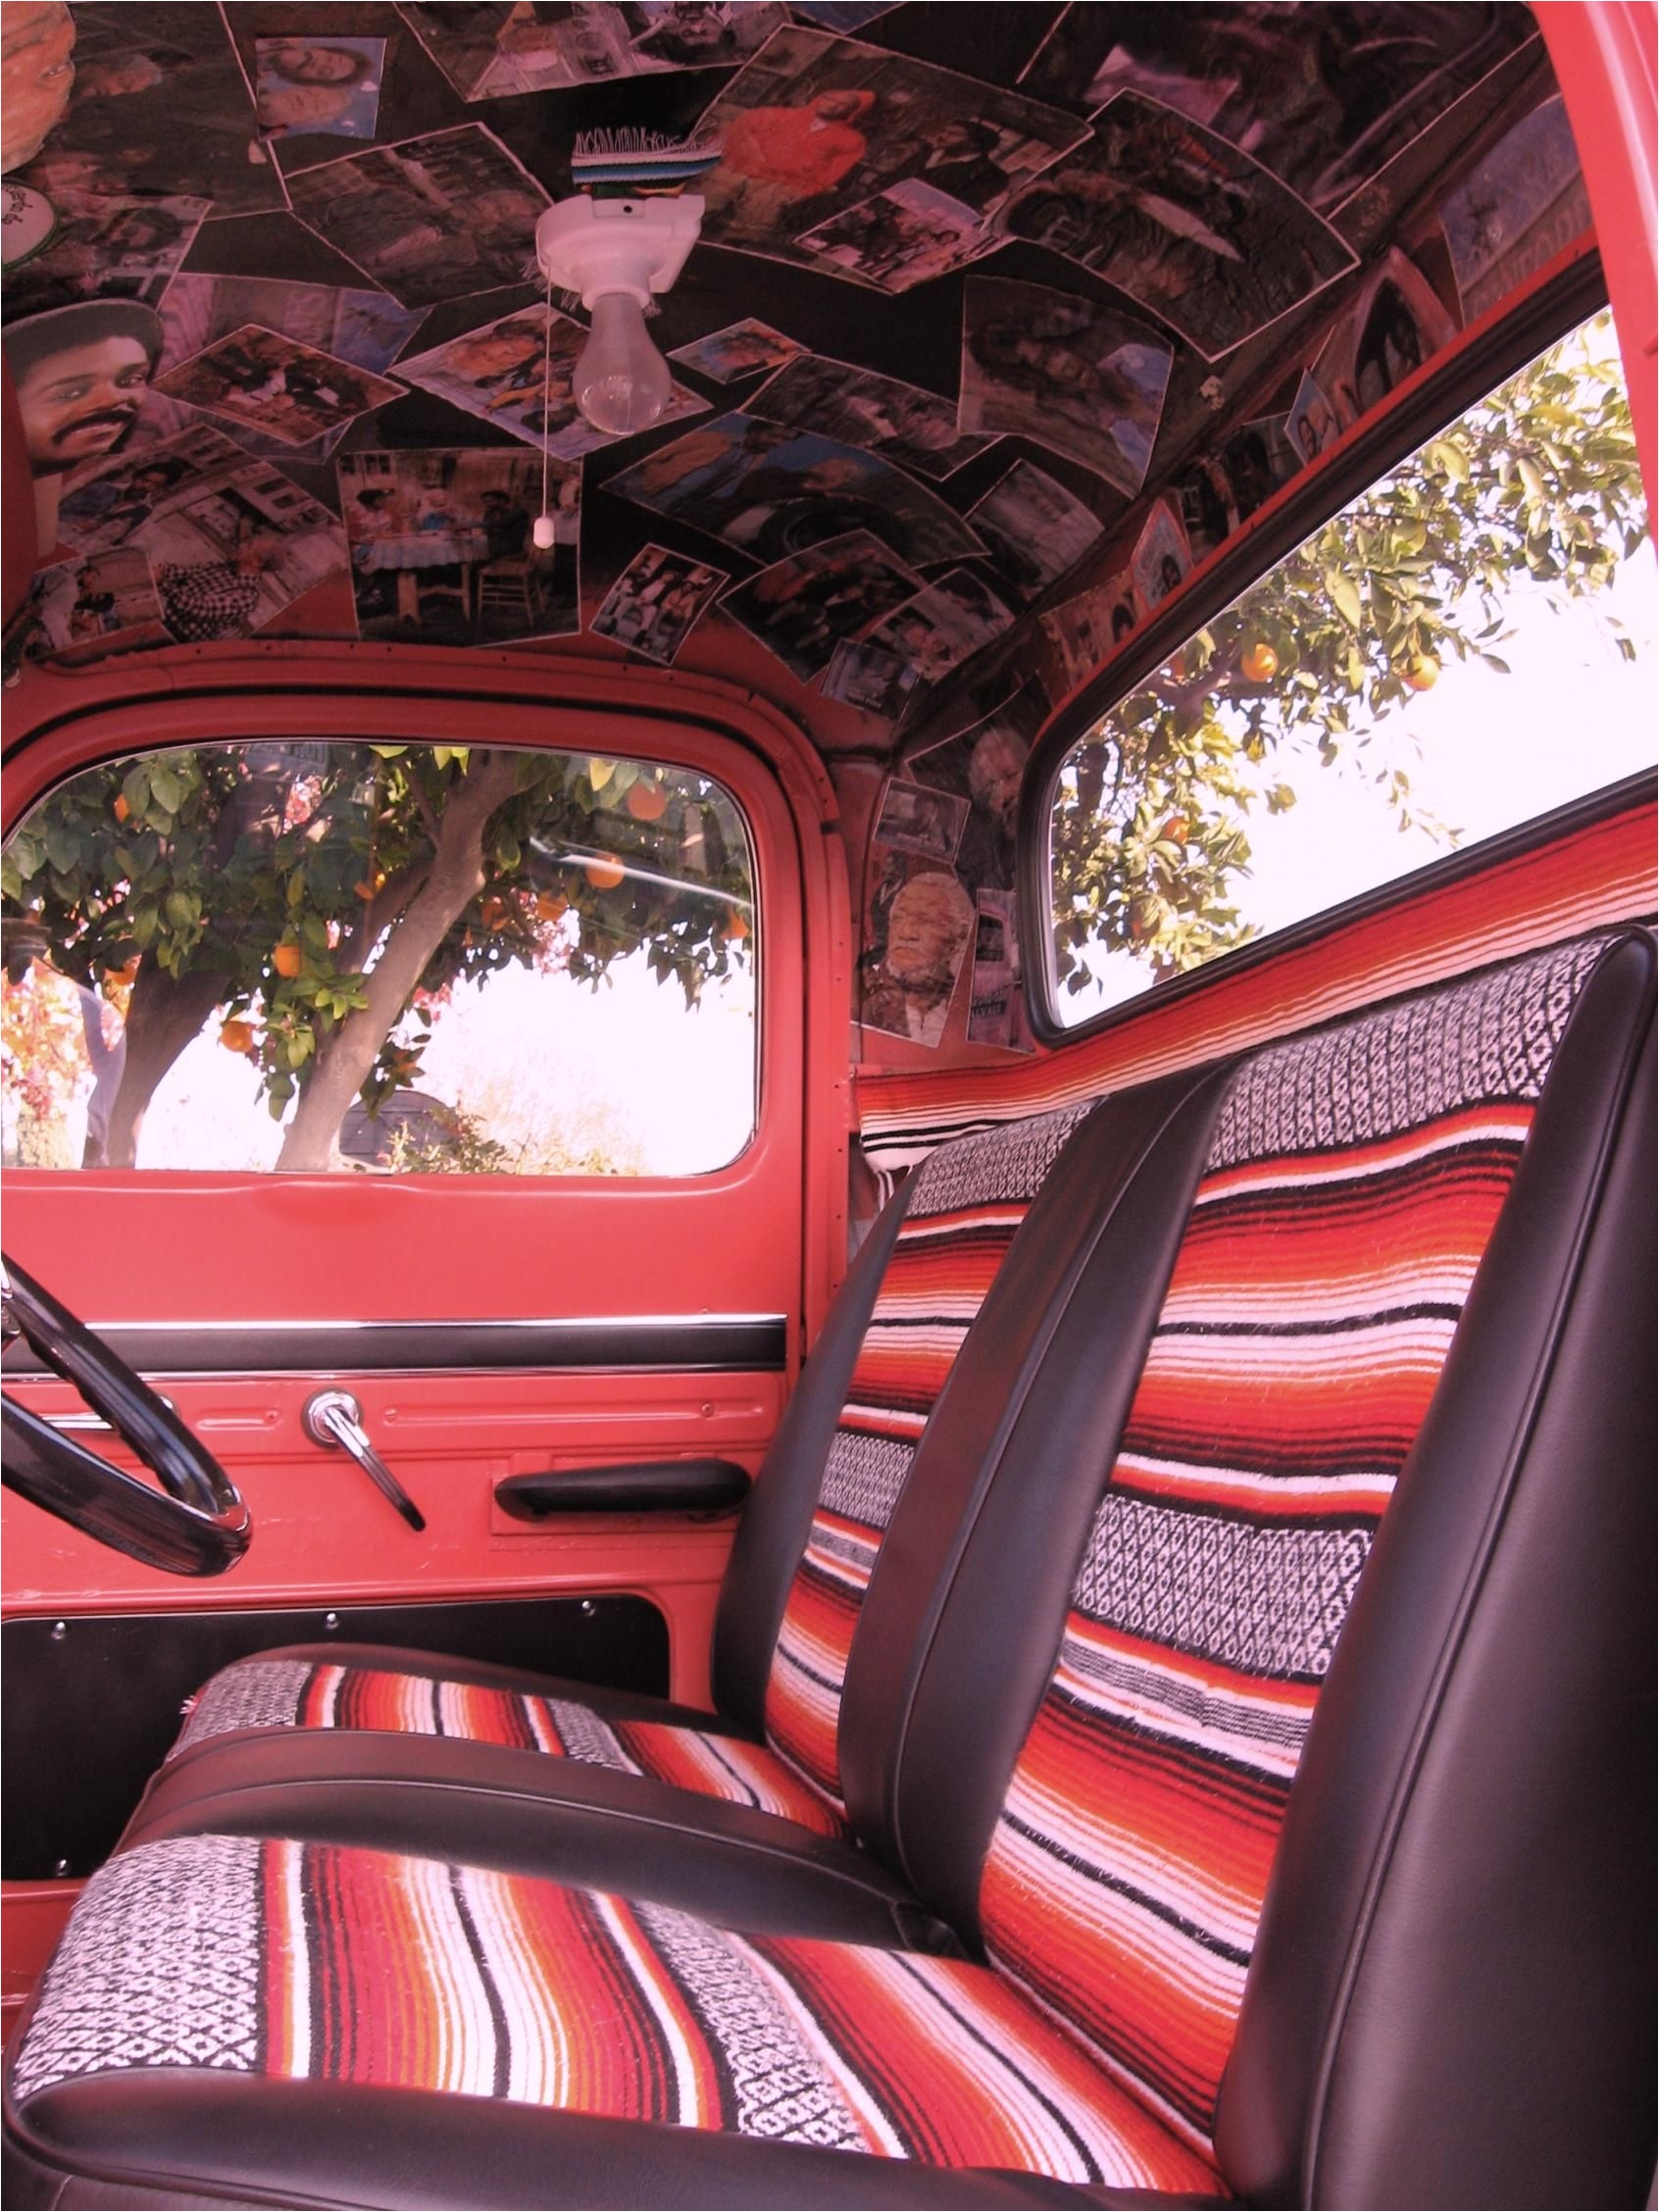 vintage truck with serape interior i want a truck that i can mod podge the ceiling on lol